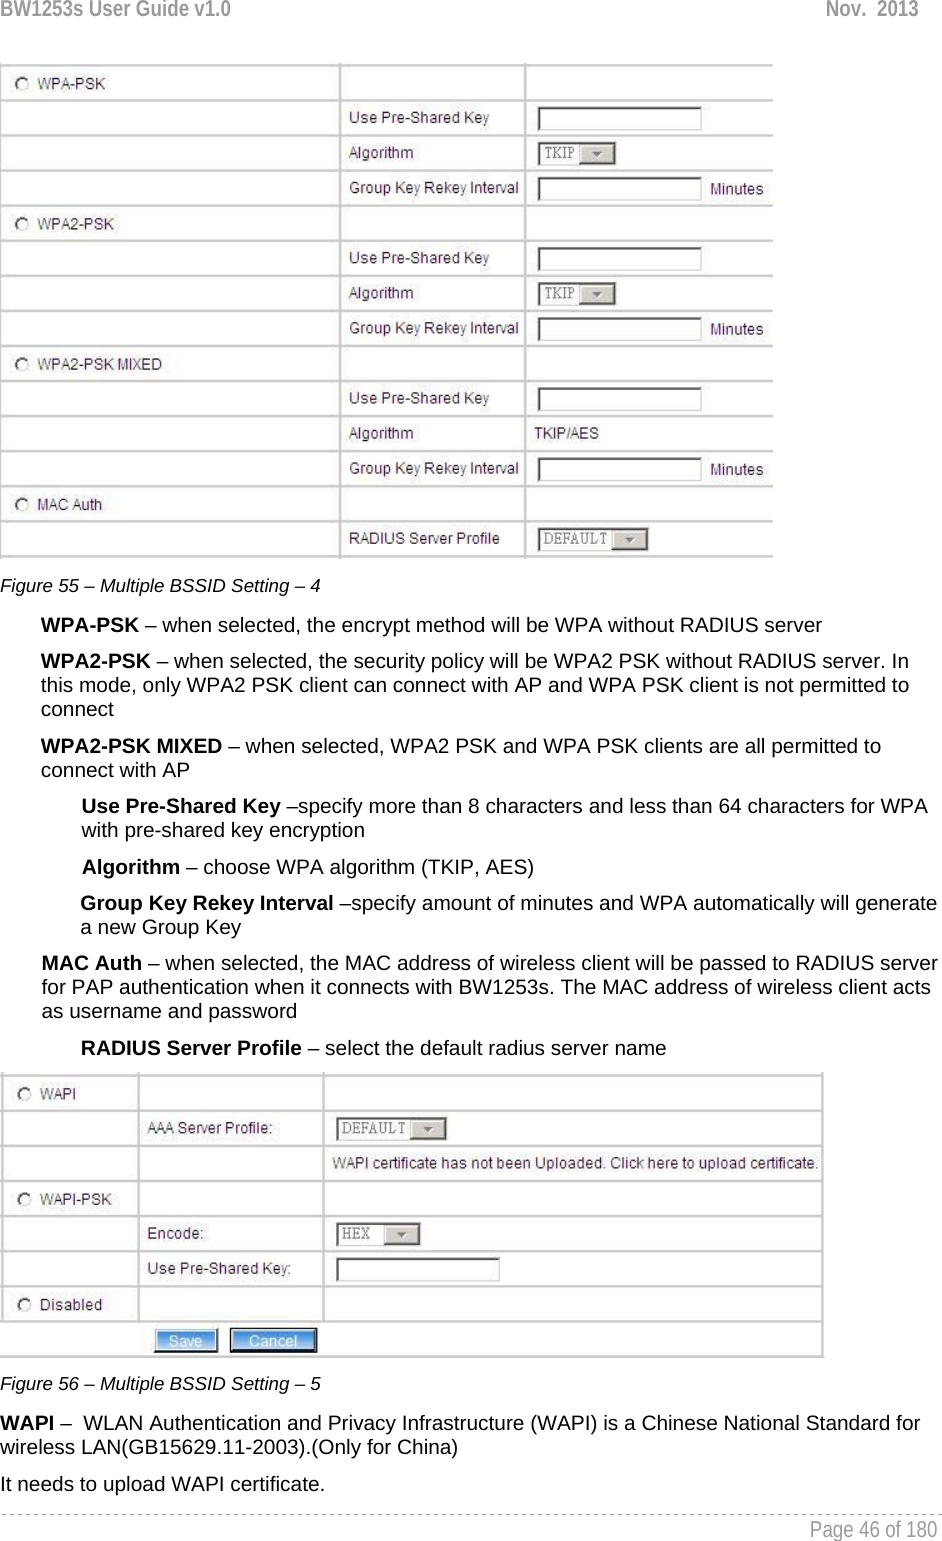 BW1253s User Guide v1.0  Nov.  2013     Page 46 of 180    Figure 55 – Multiple BSSID Setting – 4 WPA-PSK – when selected, the encrypt method will be WPA without RADIUS server WPA2-PSK – when selected, the security policy will be WPA2 PSK without RADIUS server. In this mode, only WPA2 PSK client can connect with AP and WPA PSK client is not permitted to connect WPA2-PSK MIXED – when selected, WPA2 PSK and WPA PSK clients are all permitted to connect with AP Use Pre-Shared Key –specify more than 8 characters and less than 64 characters for WPA with pre-shared key encryption Algorithm – choose WPA algorithm (TKIP, AES) Group Key Rekey Interval –specify amount of minutes and WPA automatically will generate a new Group Key MAC Auth – when selected, the MAC address of wireless client will be passed to RADIUS server for PAP authentication when it connects with BW1253s. The MAC address of wireless client acts as username and password RADIUS Server Profile – select the default radius server name  Figure 56 – Multiple BSSID Setting – 5 WAPI –  WLAN Authentication and Privacy Infrastructure (WAPI) is a Chinese National Standard for wireless LAN(GB15629.11-2003).(Only for China) It needs to upload WAPI certificate. 